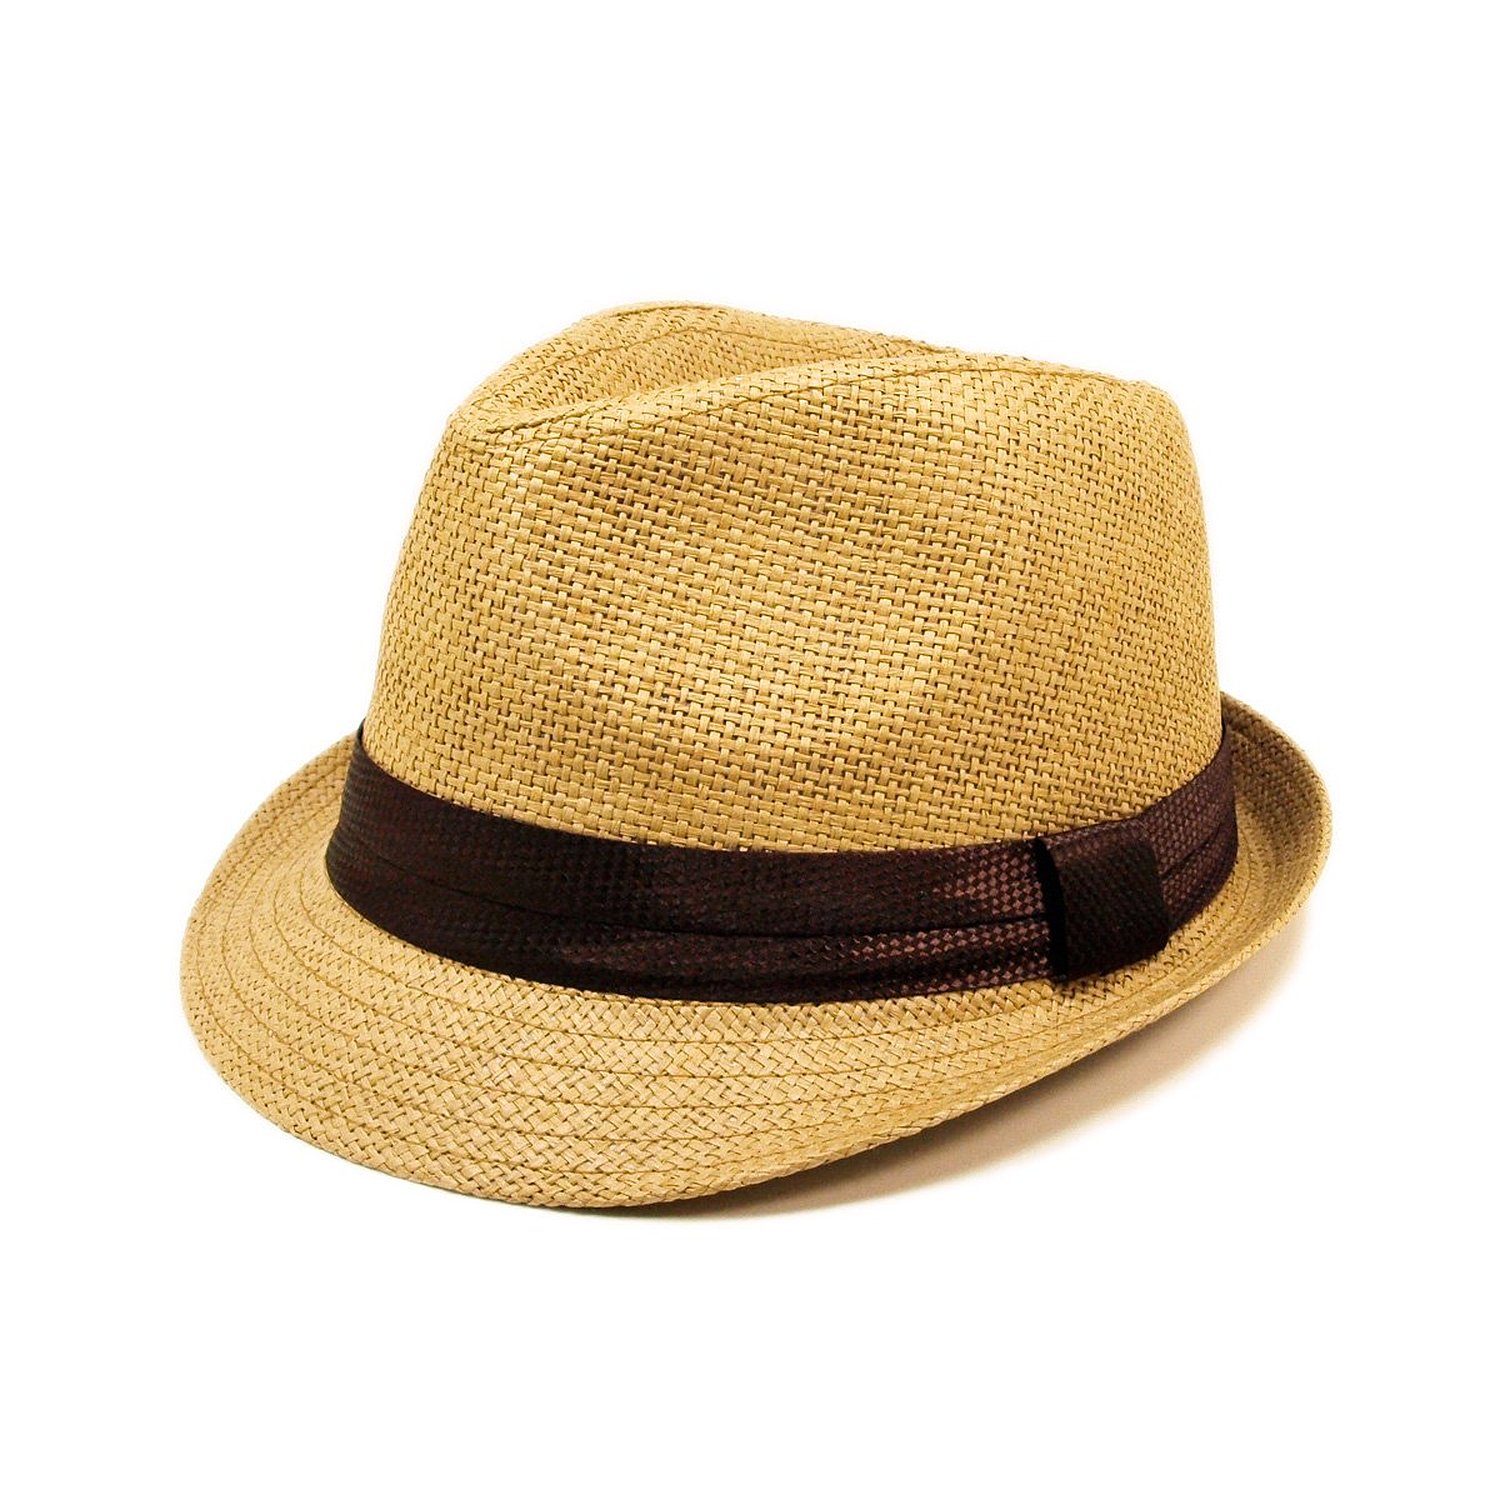 Classic Tan Fedora Straw Hat - Different Color Band Available